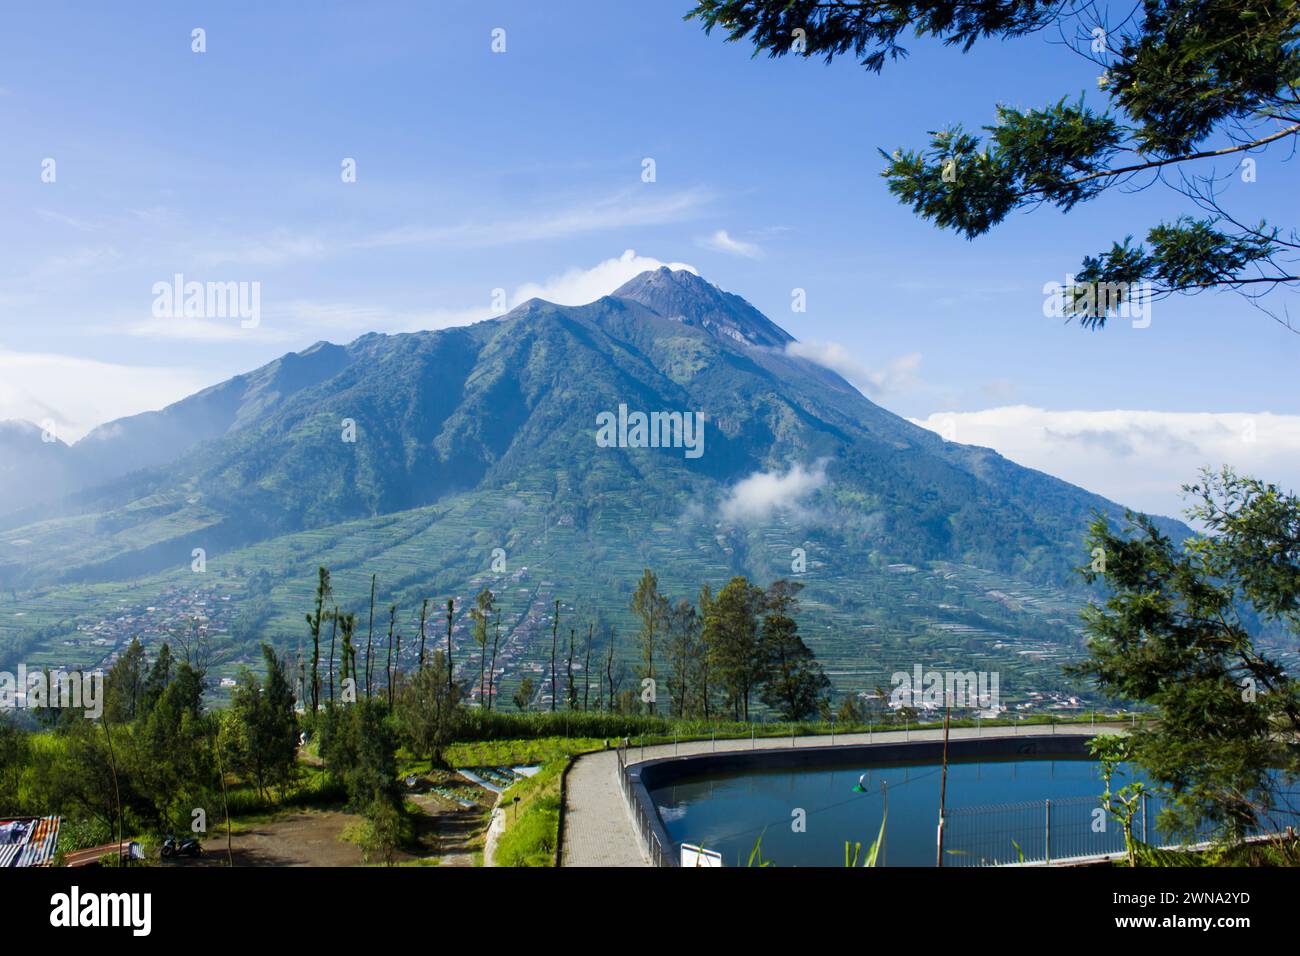 Photo of the view of Manajar Reservoir with a view of Mount Merbabu in Boyolali, Central Java Stock Photo